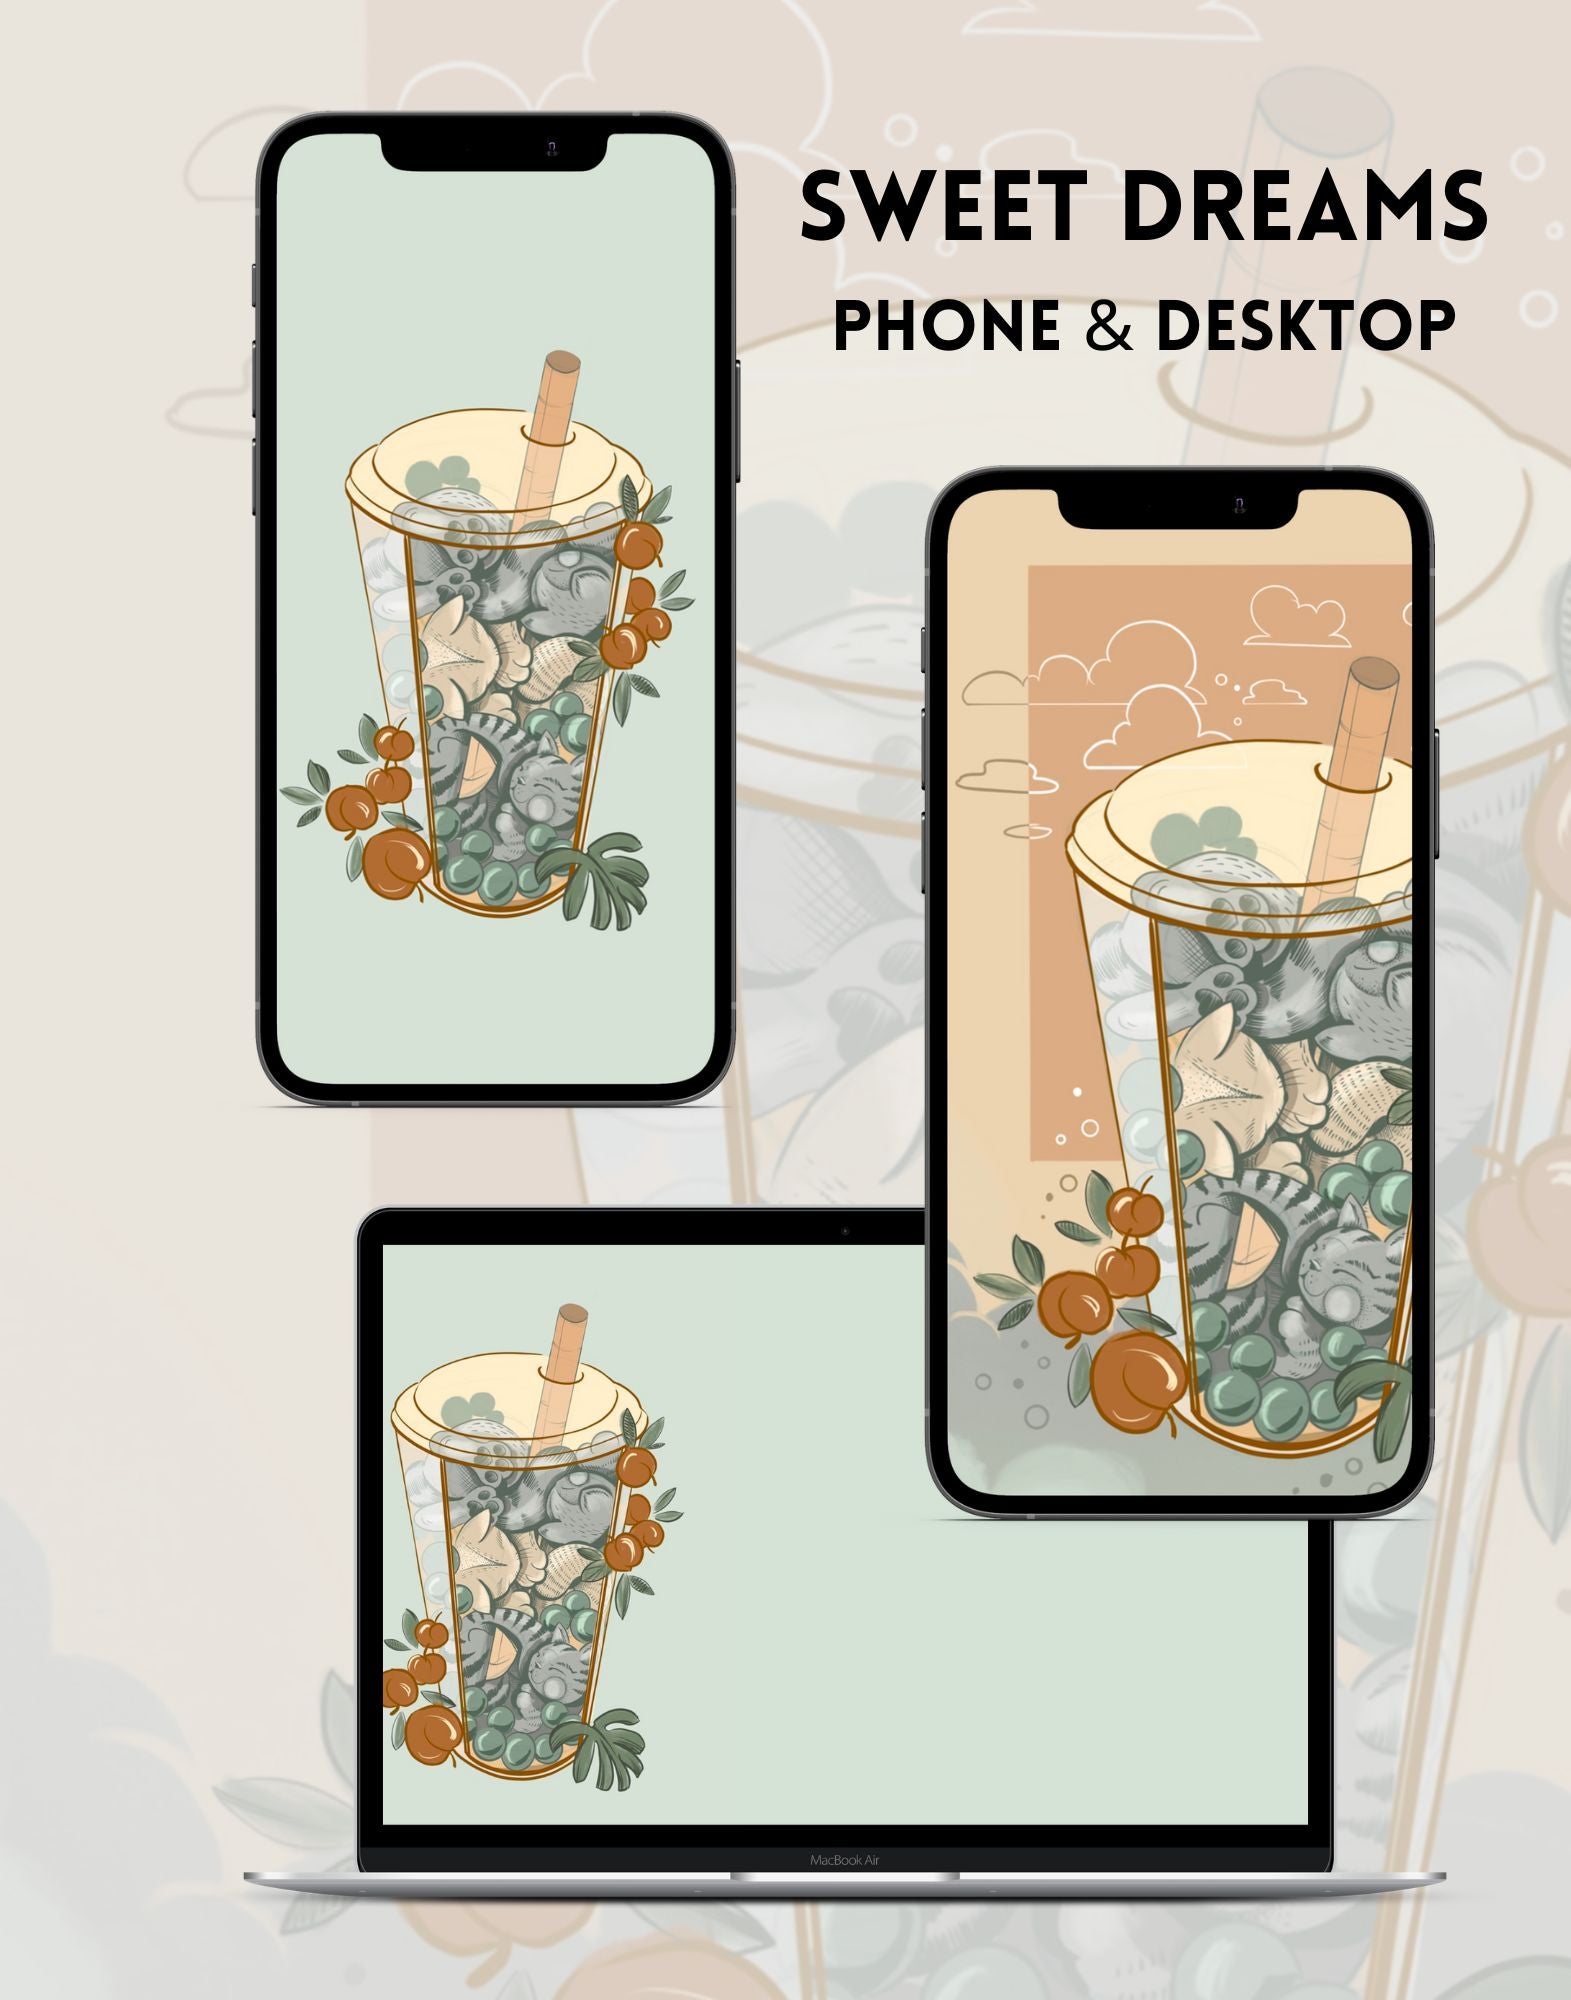 CN Tower Phone Background - Kevin 's Ko-fi Shop - Ko-fi ❤️ Where creators  get support from fans through donations, memberships, shop sales and more!  The original 'Buy Me a Coffee' Page.